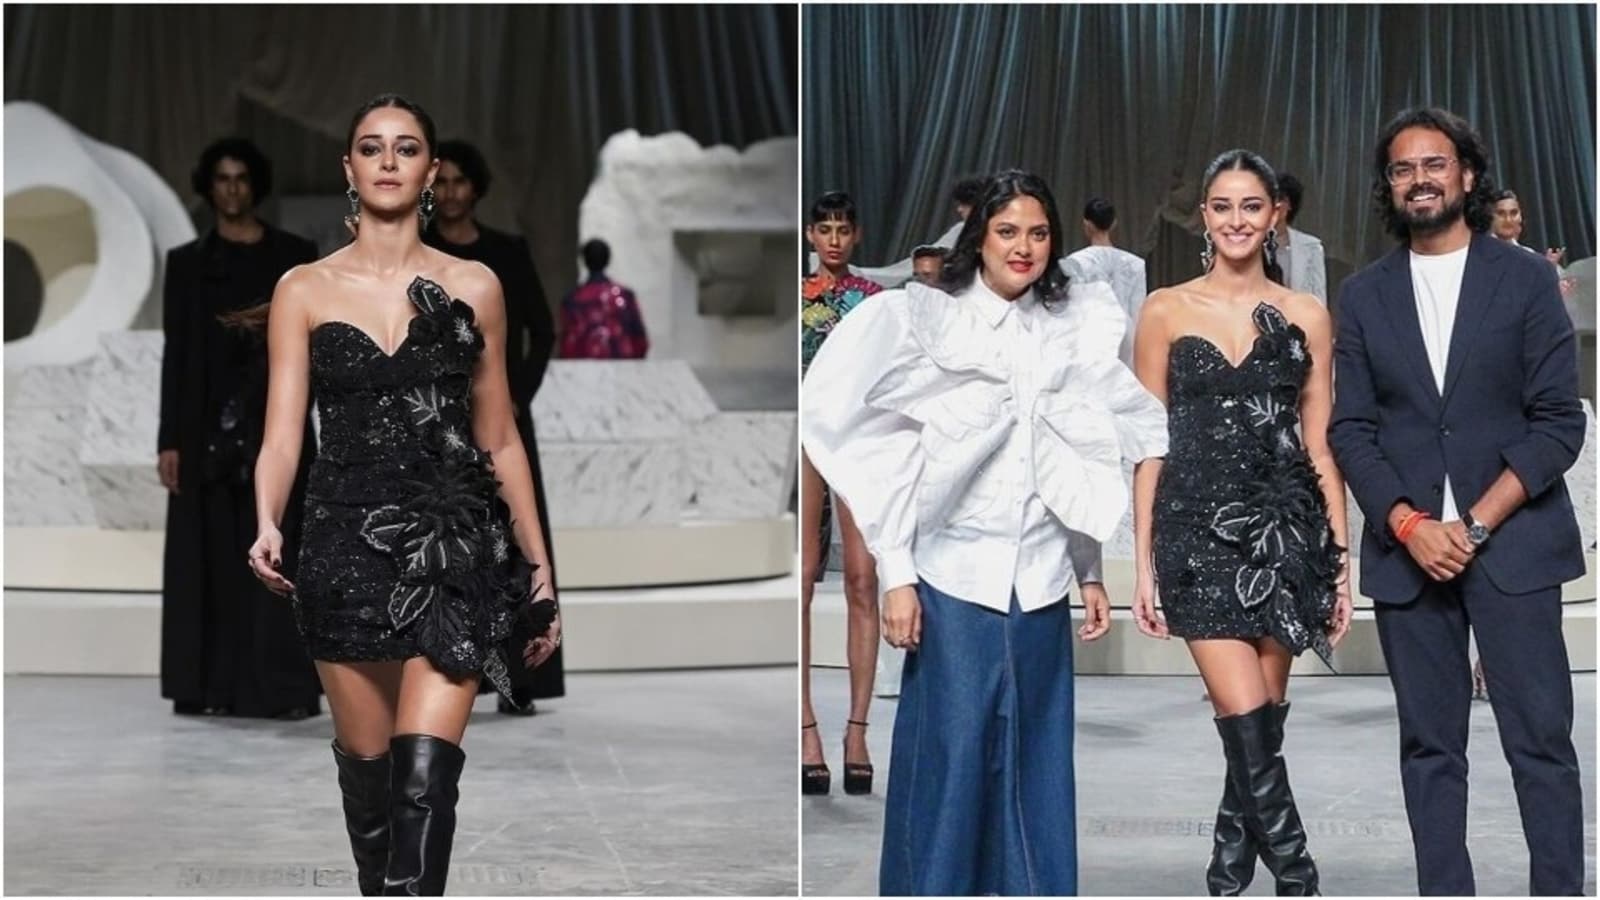 Ananya Panday for Rahul Mishra at Lakme Fashion Week steals the show in black mini dress; fans say the ‘best ramp walk’